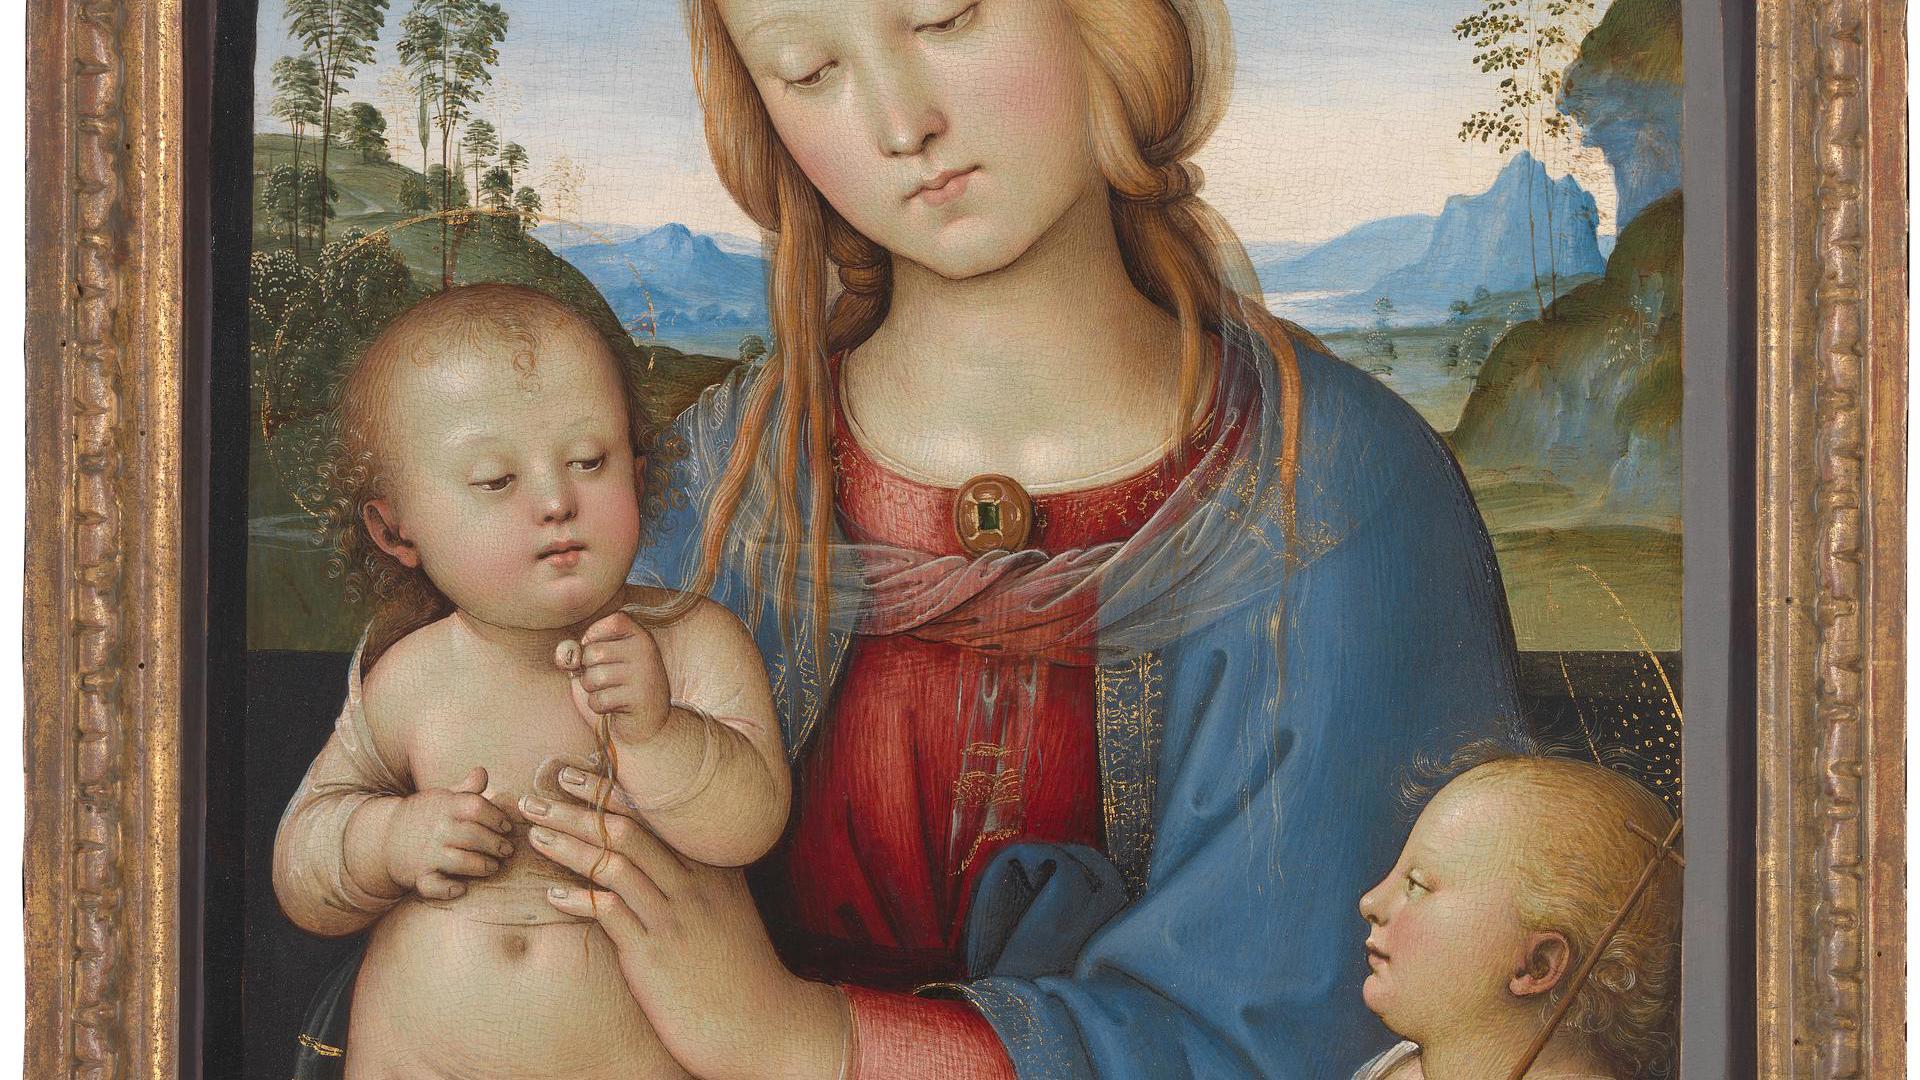 The Virgin and Child with Saint John by Associate of Pietro Perugino